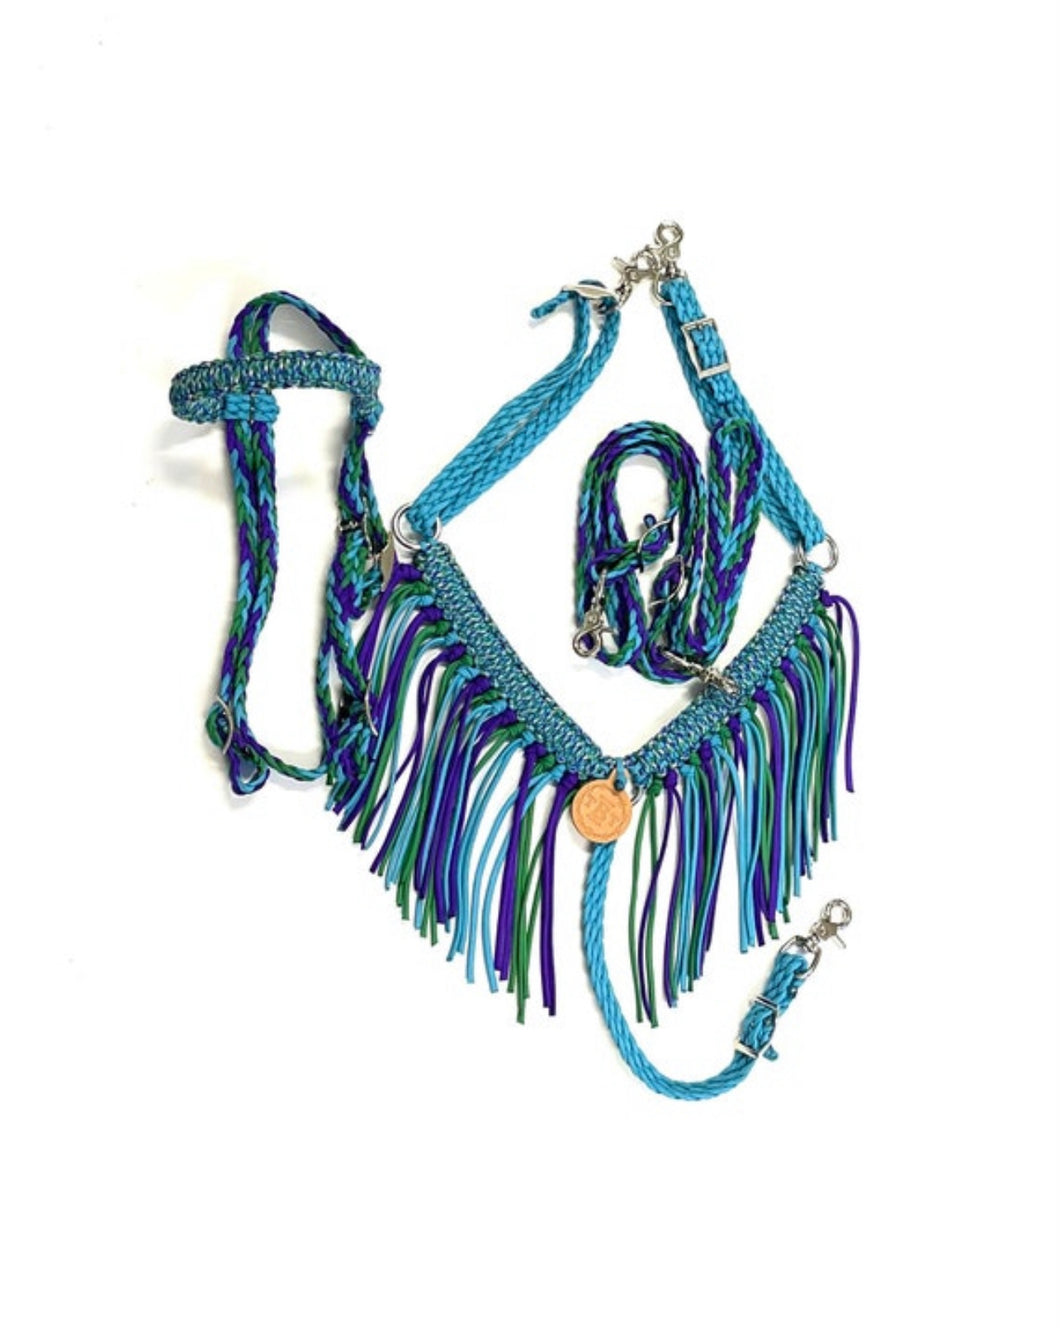 Peacock horse or pony Tack set